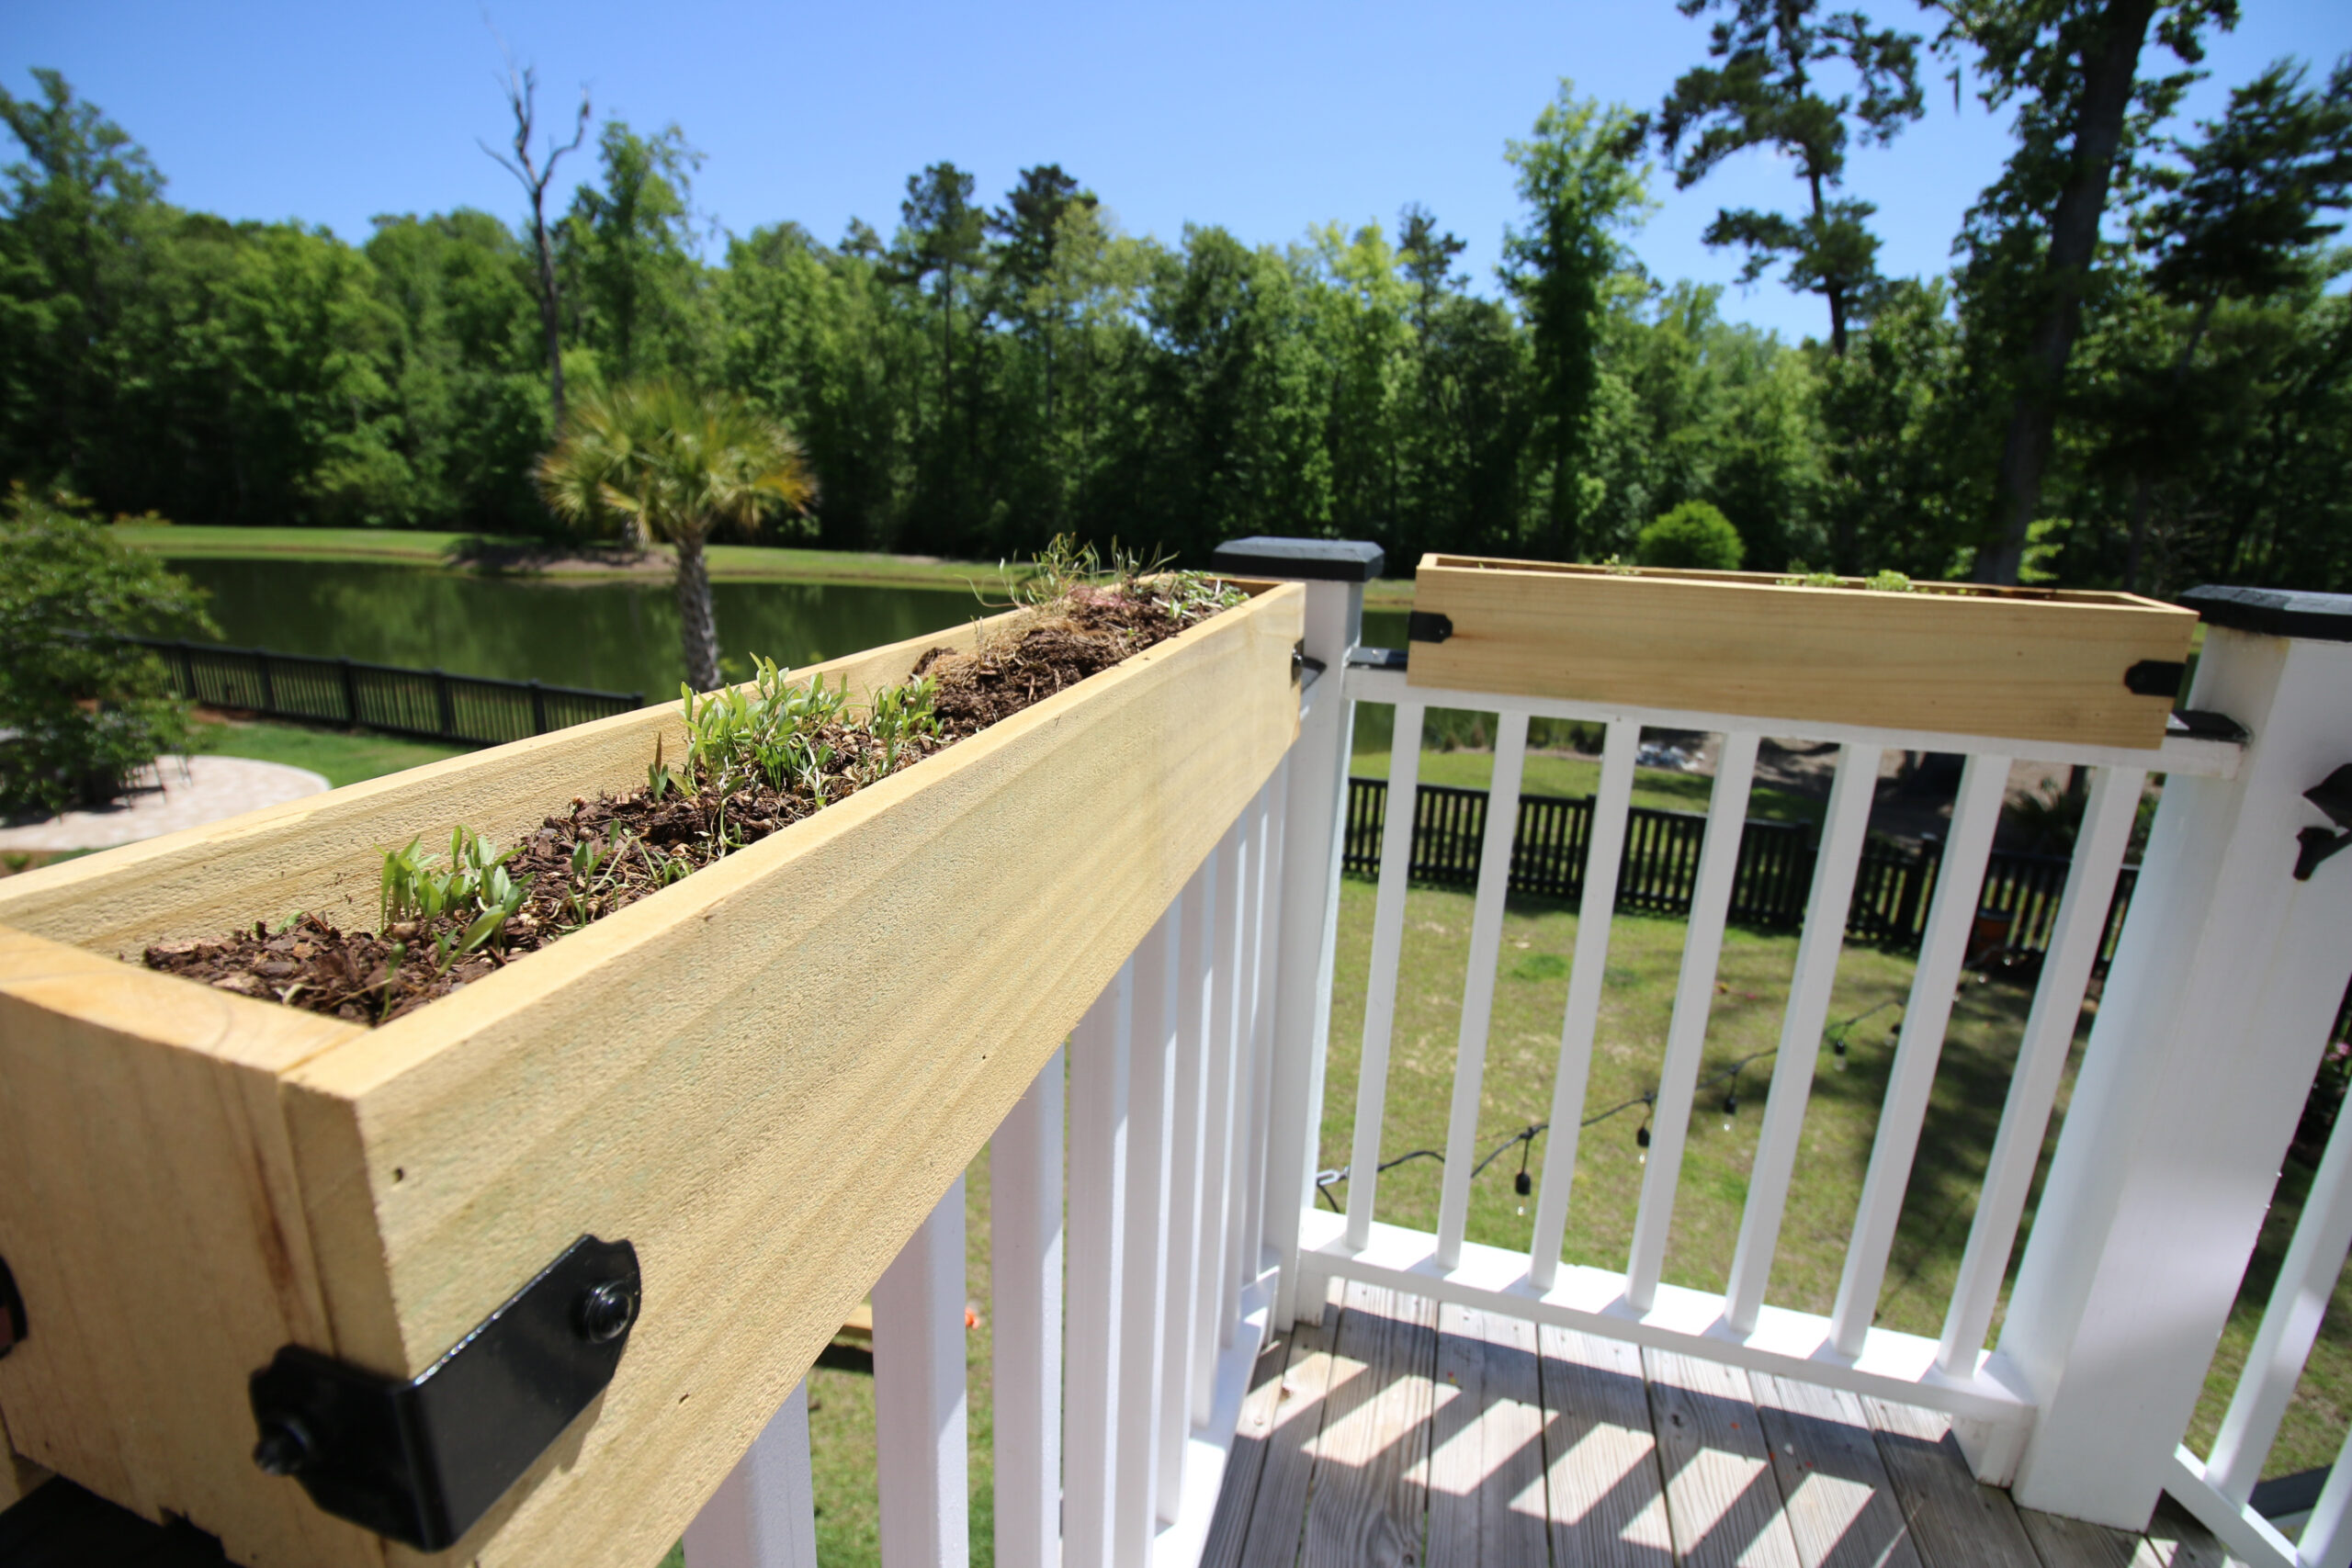 How to rail planters